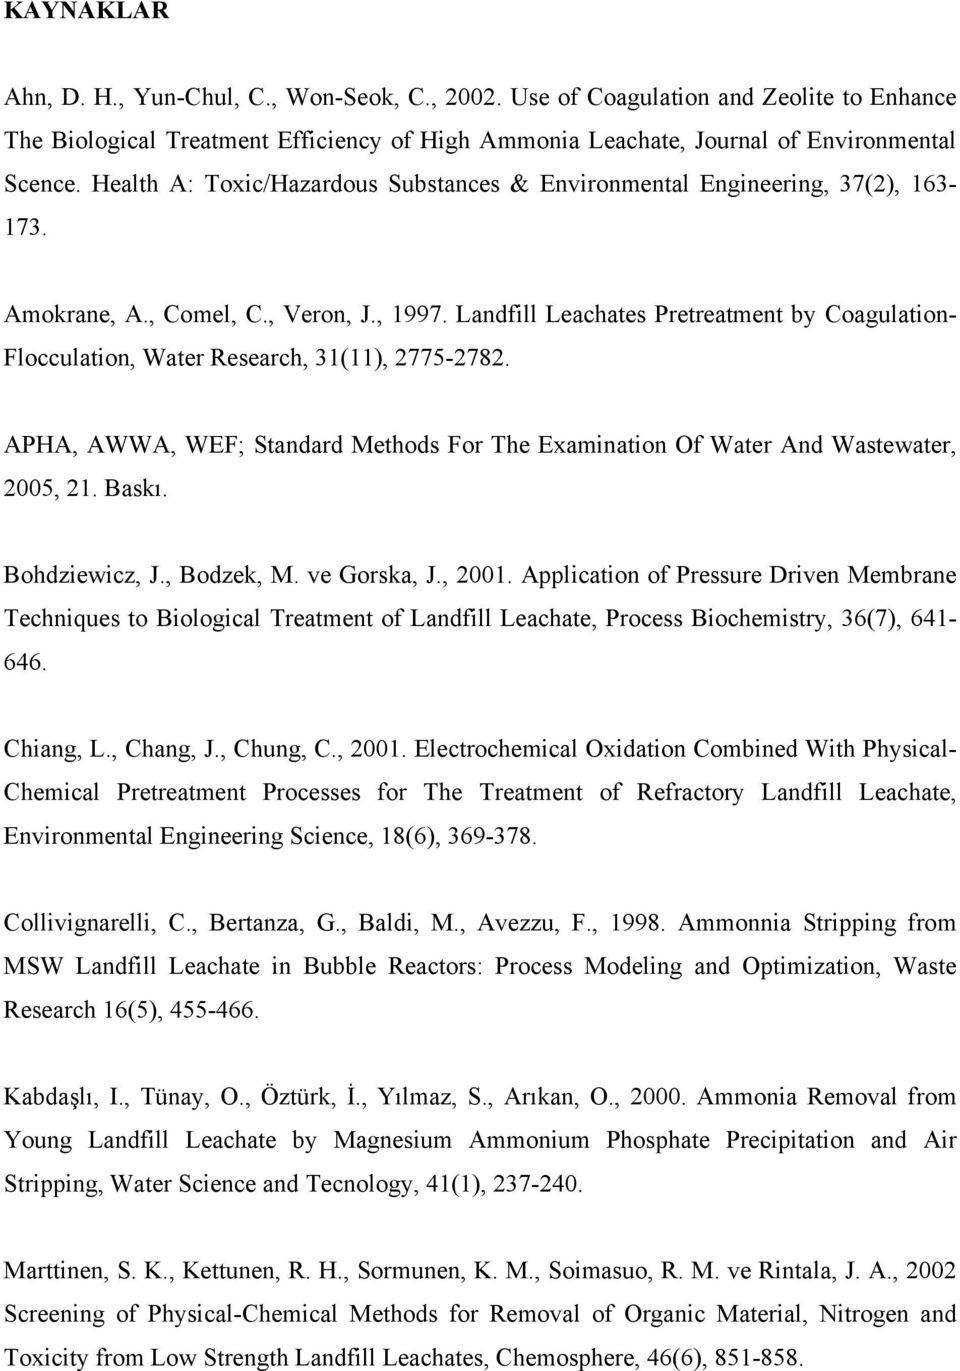 Landfill Leachates Pretreatment by Coagulation- Flocculation, Water Research, 31(11), 2775-2782. APHA, AWWA, WEF; Standard Methods For The Examination Of Water And Wastewater, 2005, 21. Baskı.